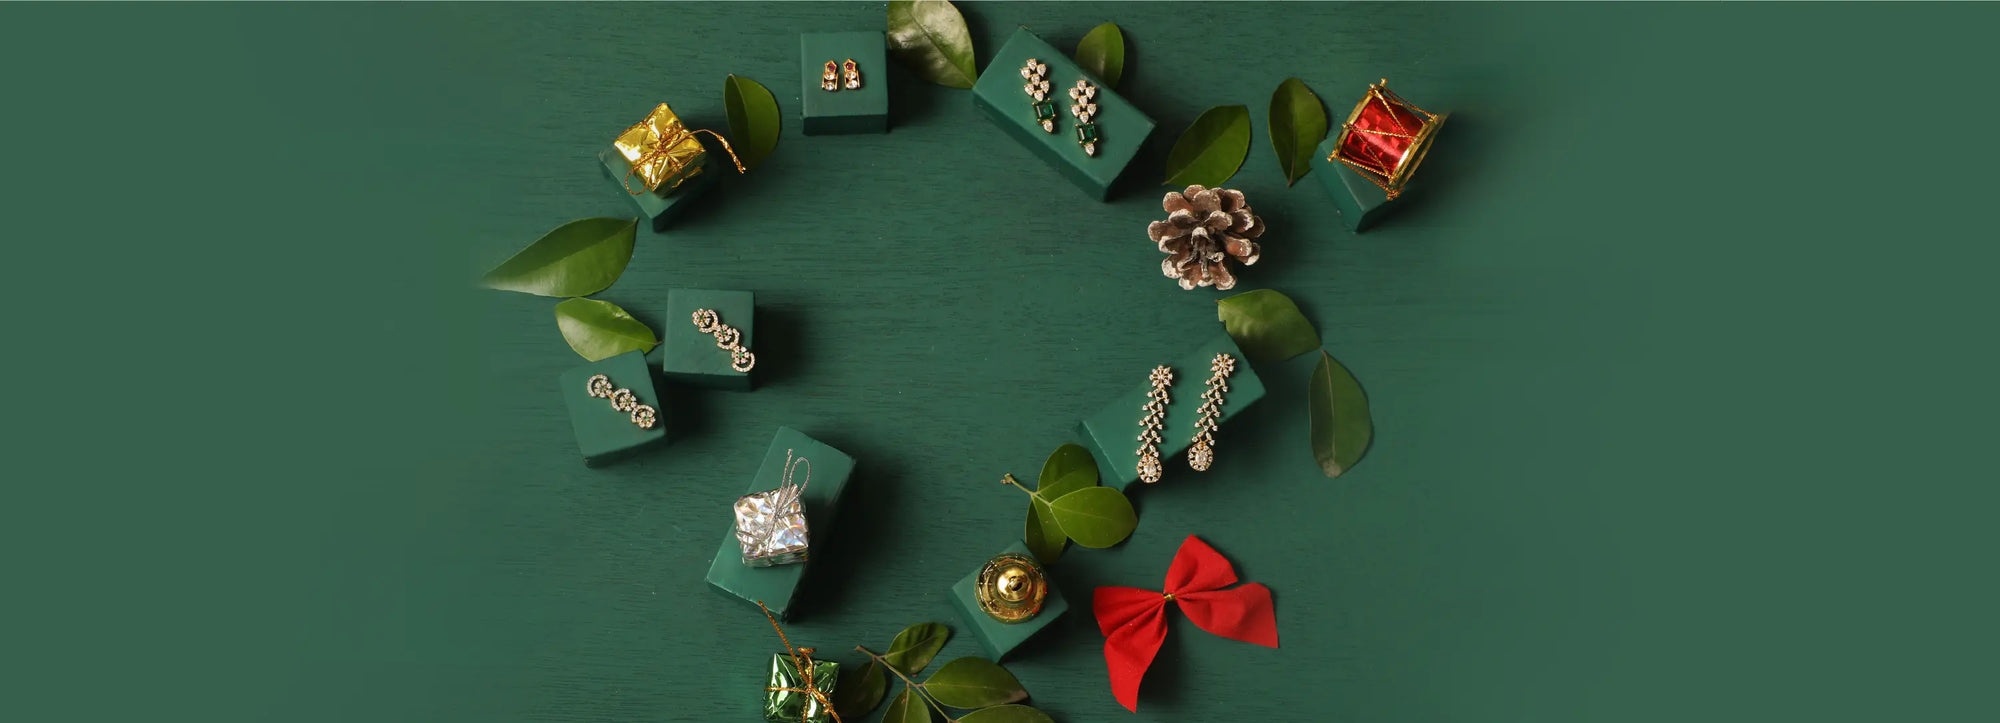 Handpicked Christmas Jewellery Gifts for this Holiday Season